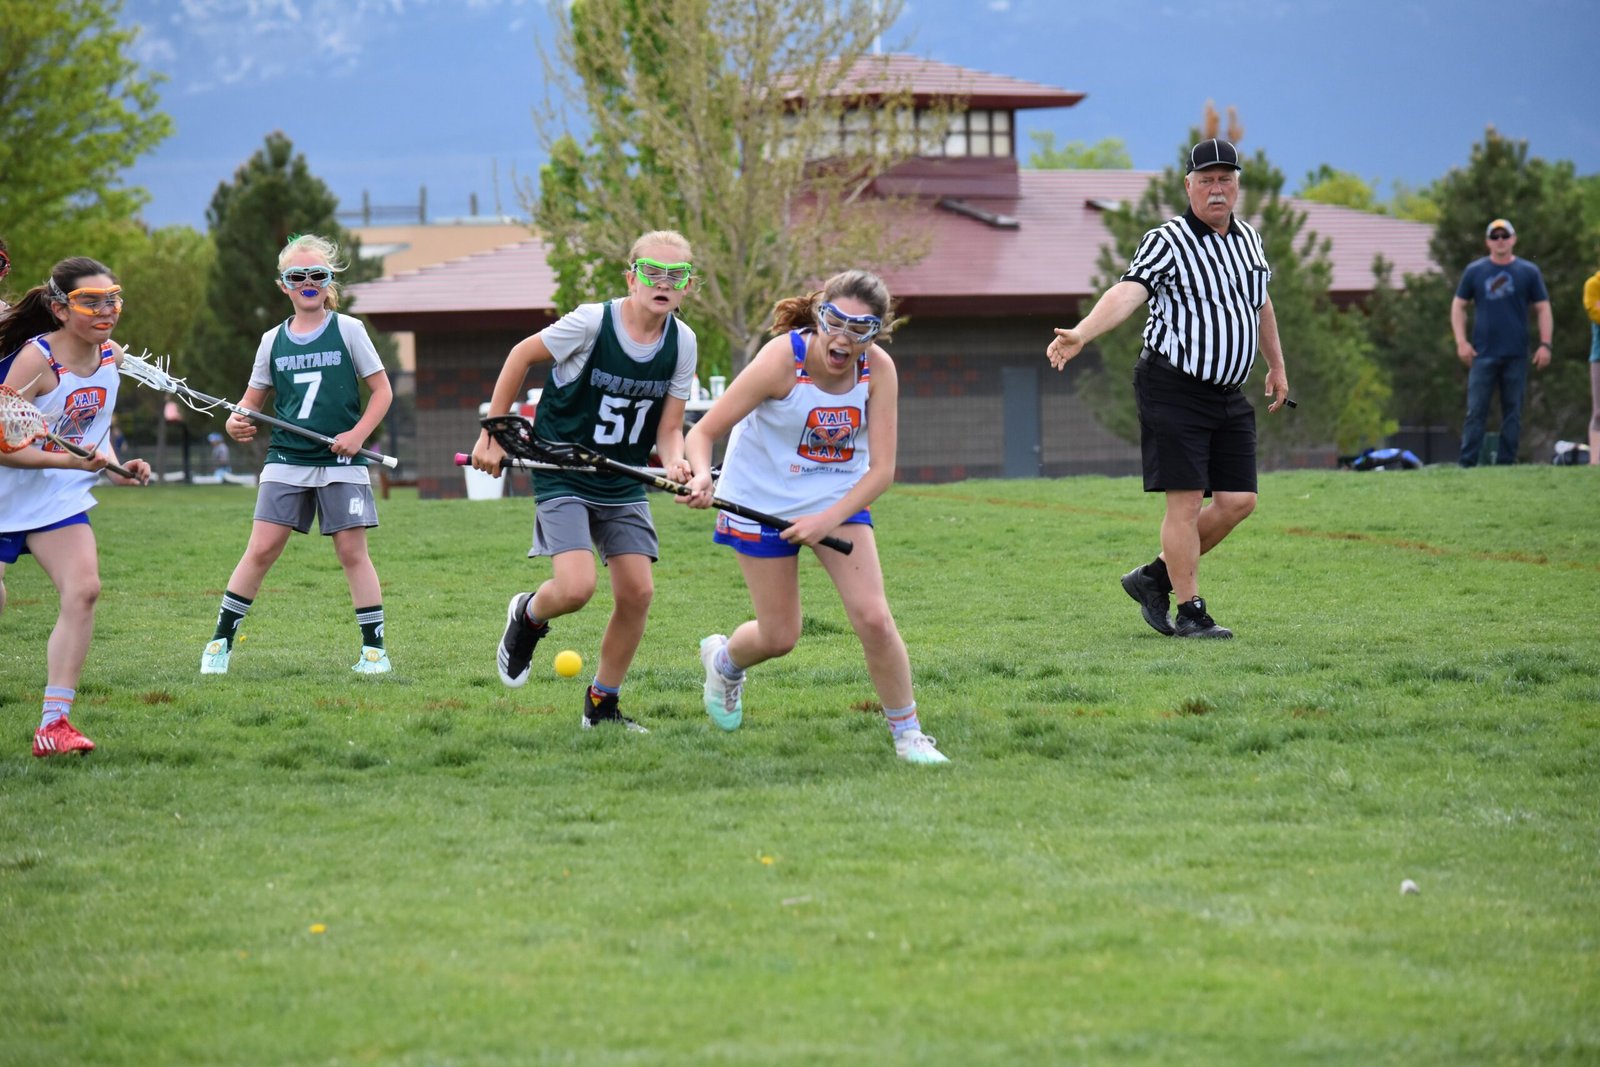 to Vail Valley Lacrosse Club